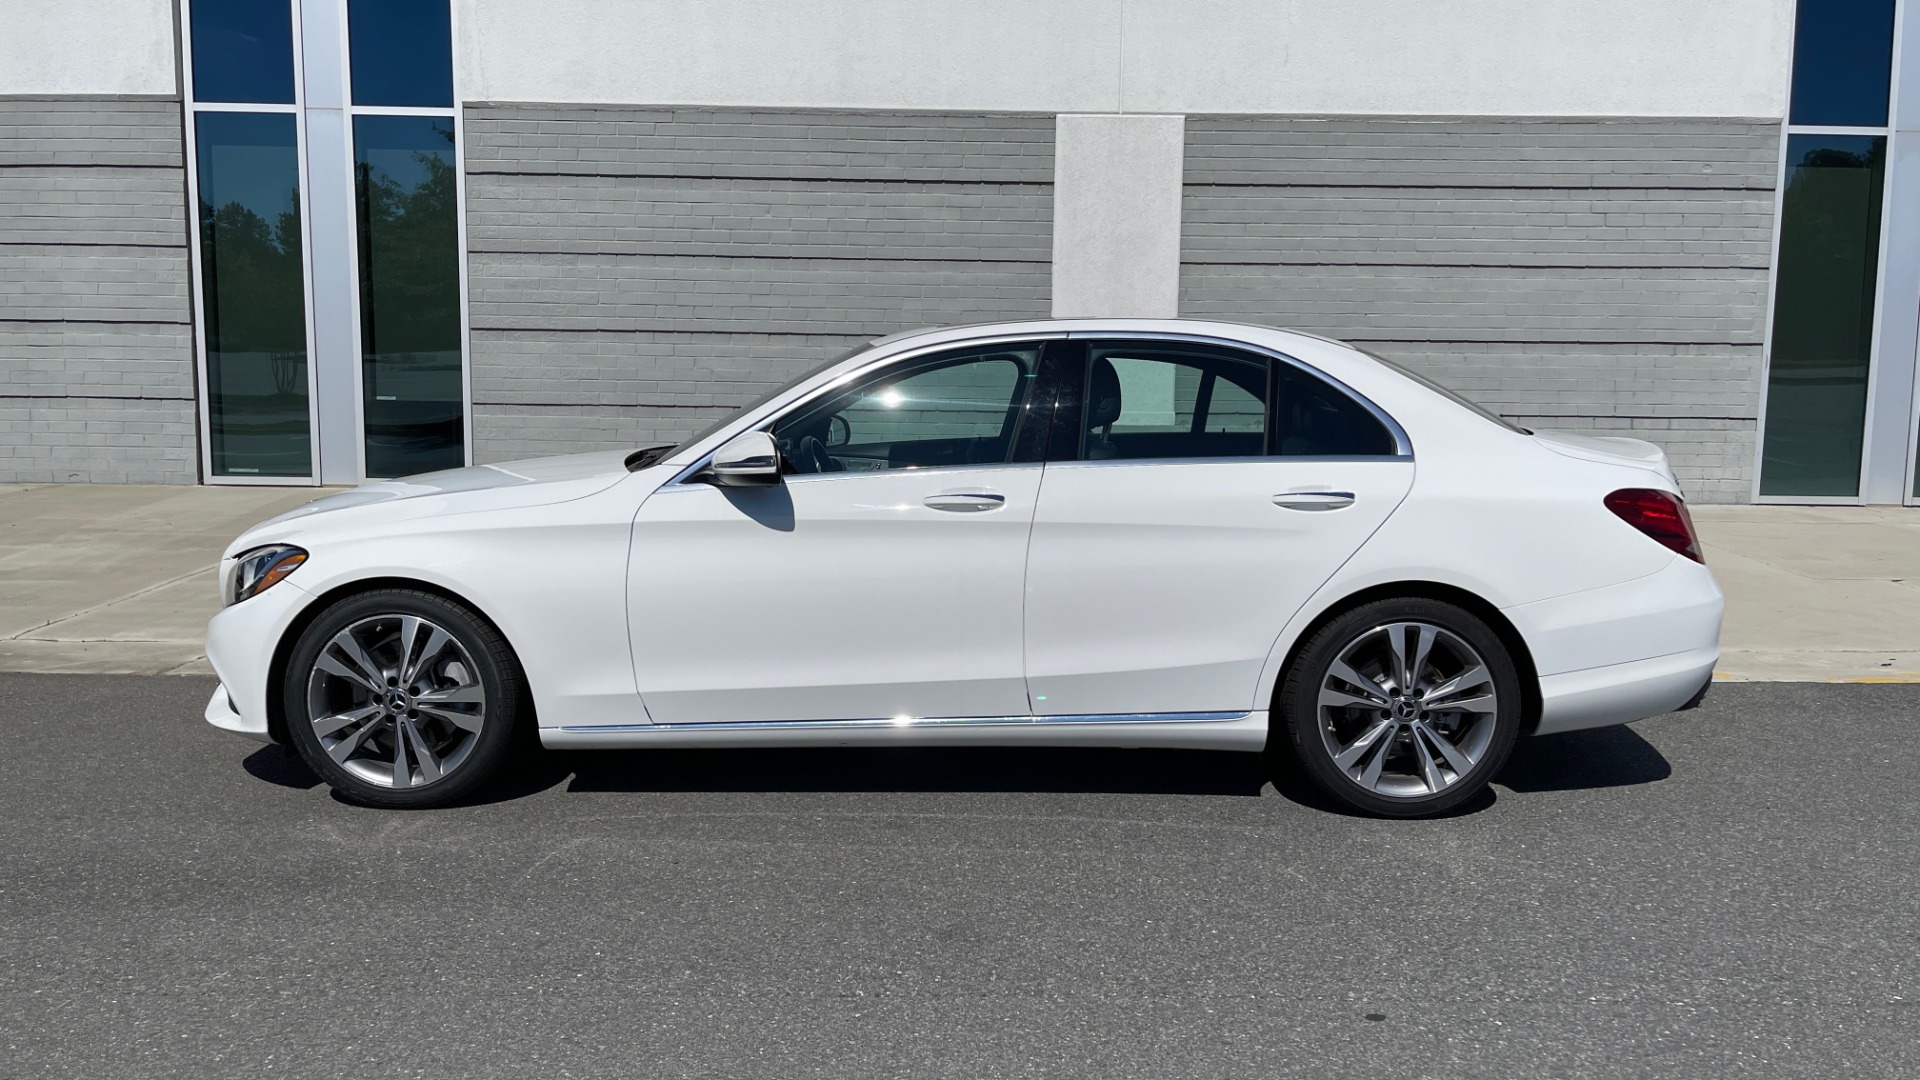 Used 2018 Mercedes-Benz C-CLASS C 300 2.0L PREMIUM / APPLE CARPLAY / BSA / HTD STS / REARVIEW for sale Sold at Formula Imports in Charlotte NC 28227 4